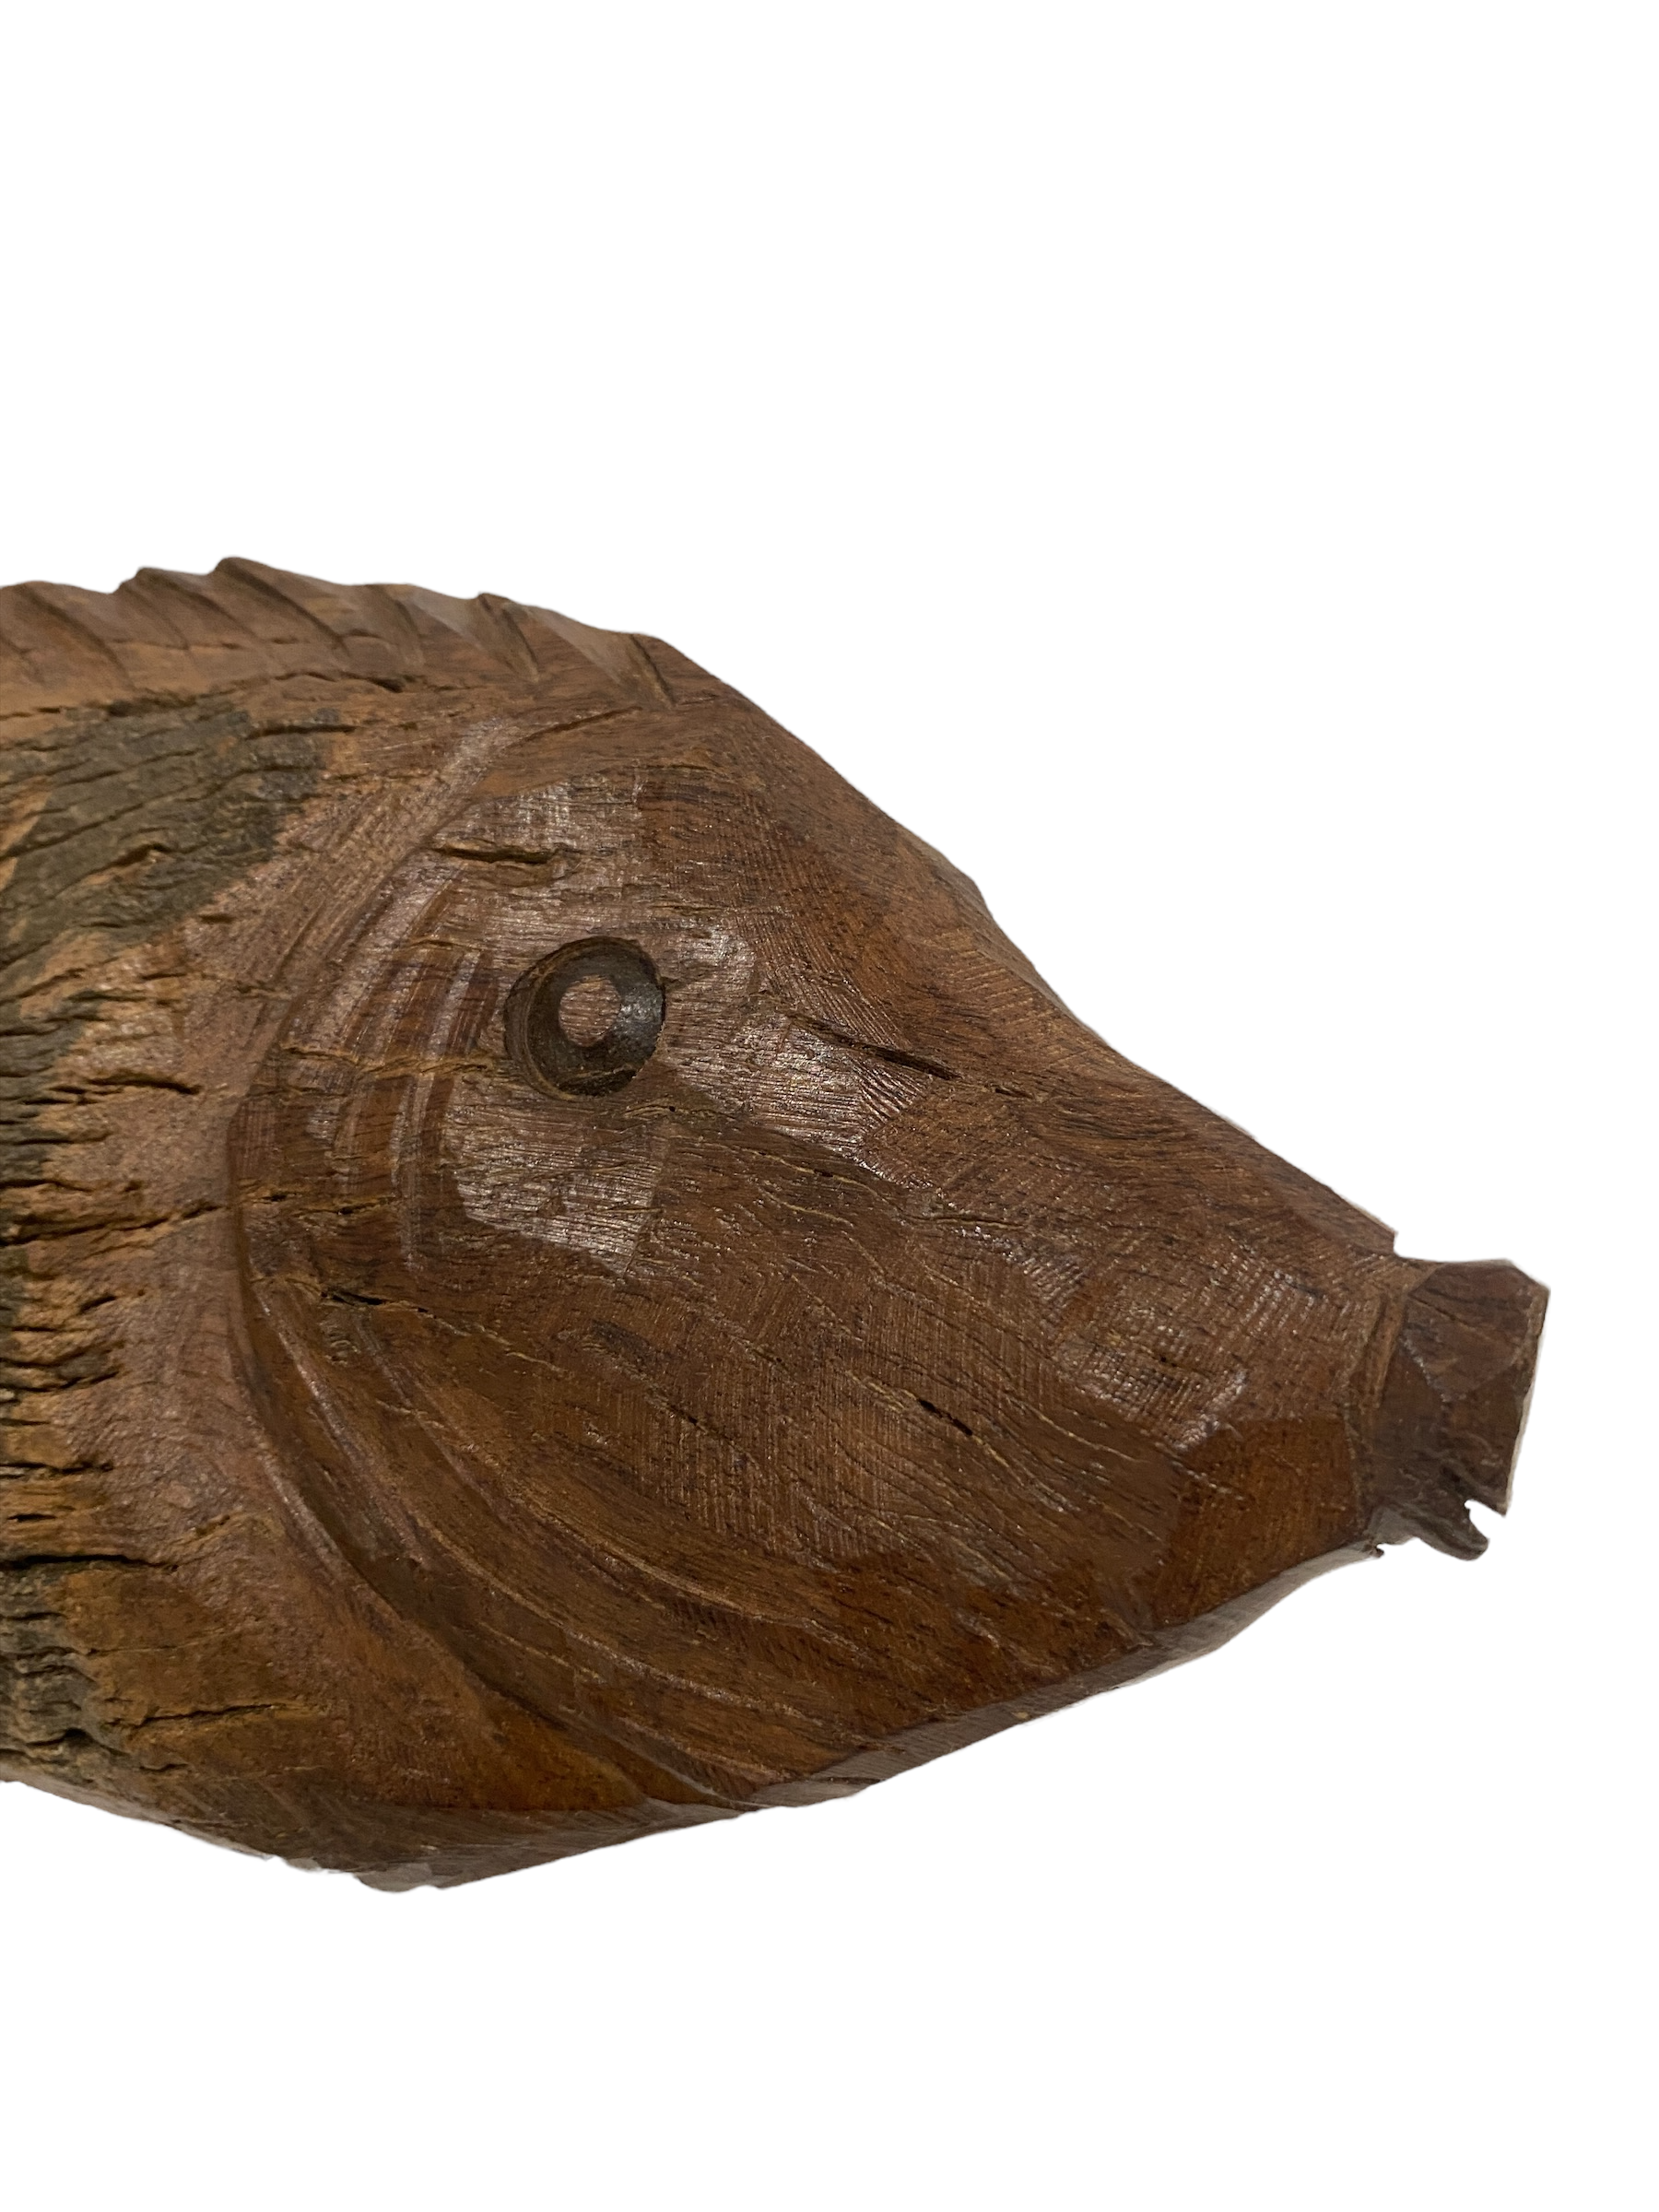 Driftwood Hand Carved Fish - M (1201)